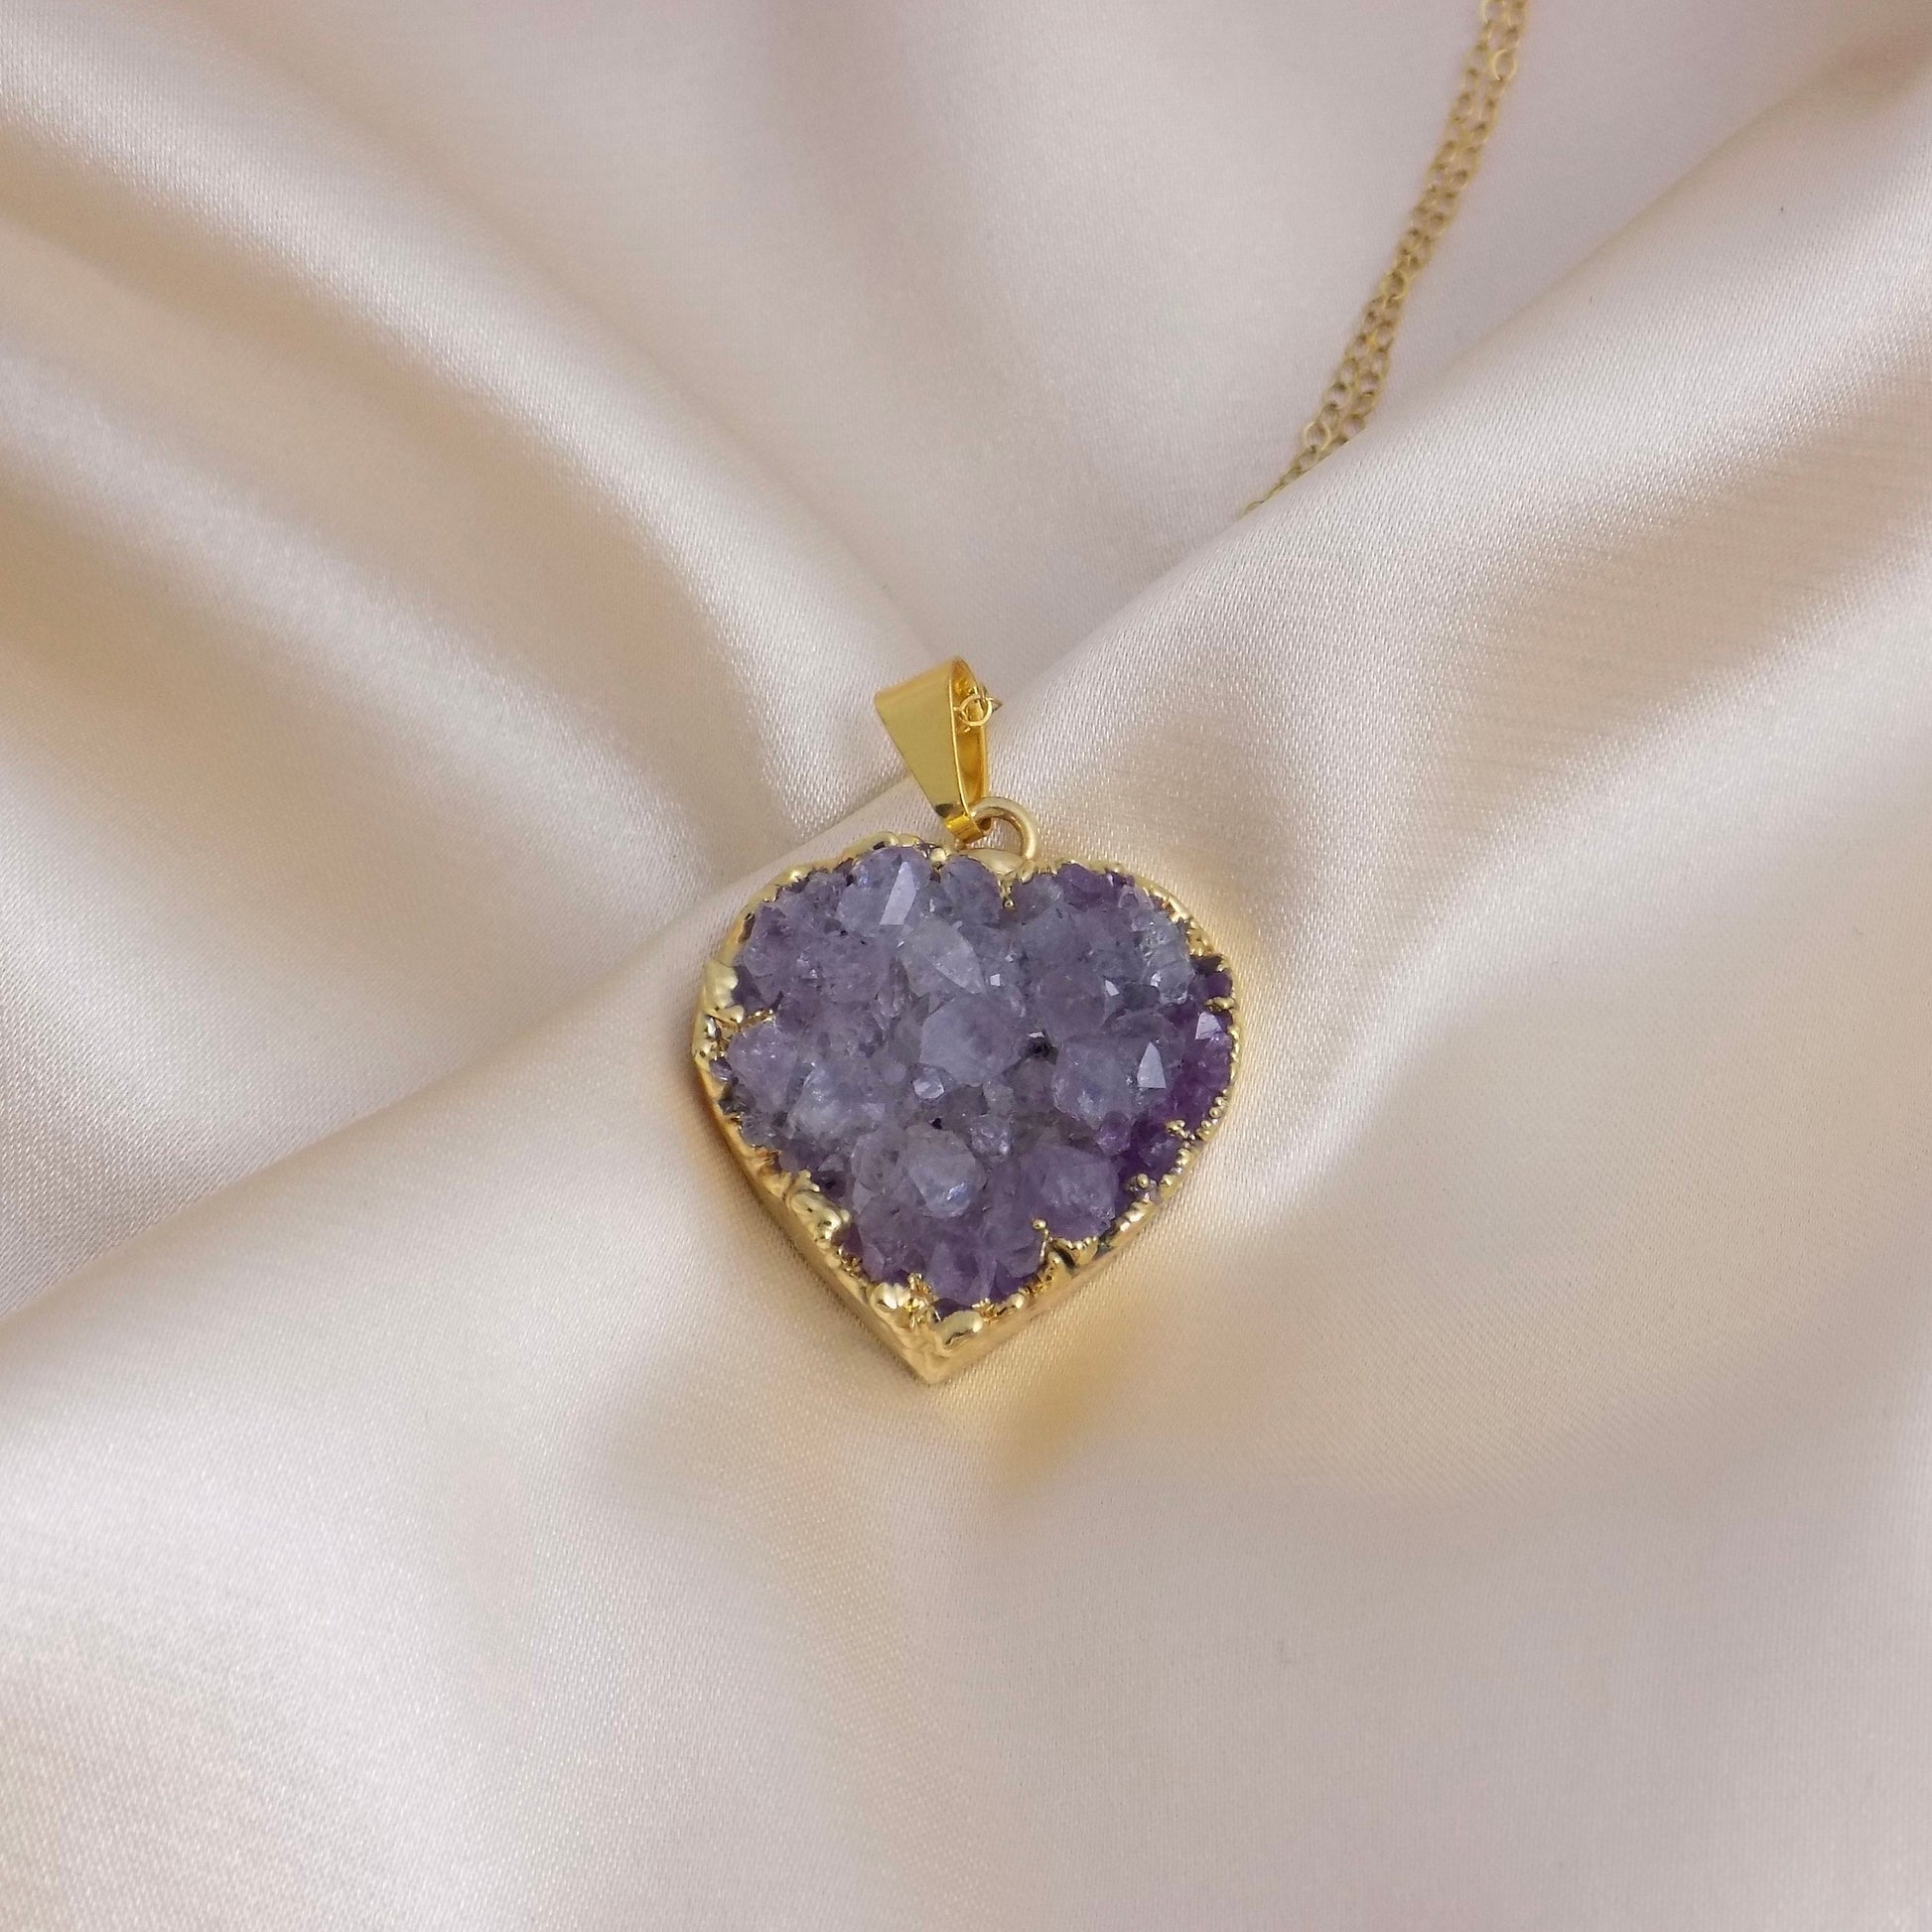 Mom Gift, Amethyst Heart Necklace Gold, Purple Druzy Pendant, Gifts For Grandma, Gift For Sister, M6-82